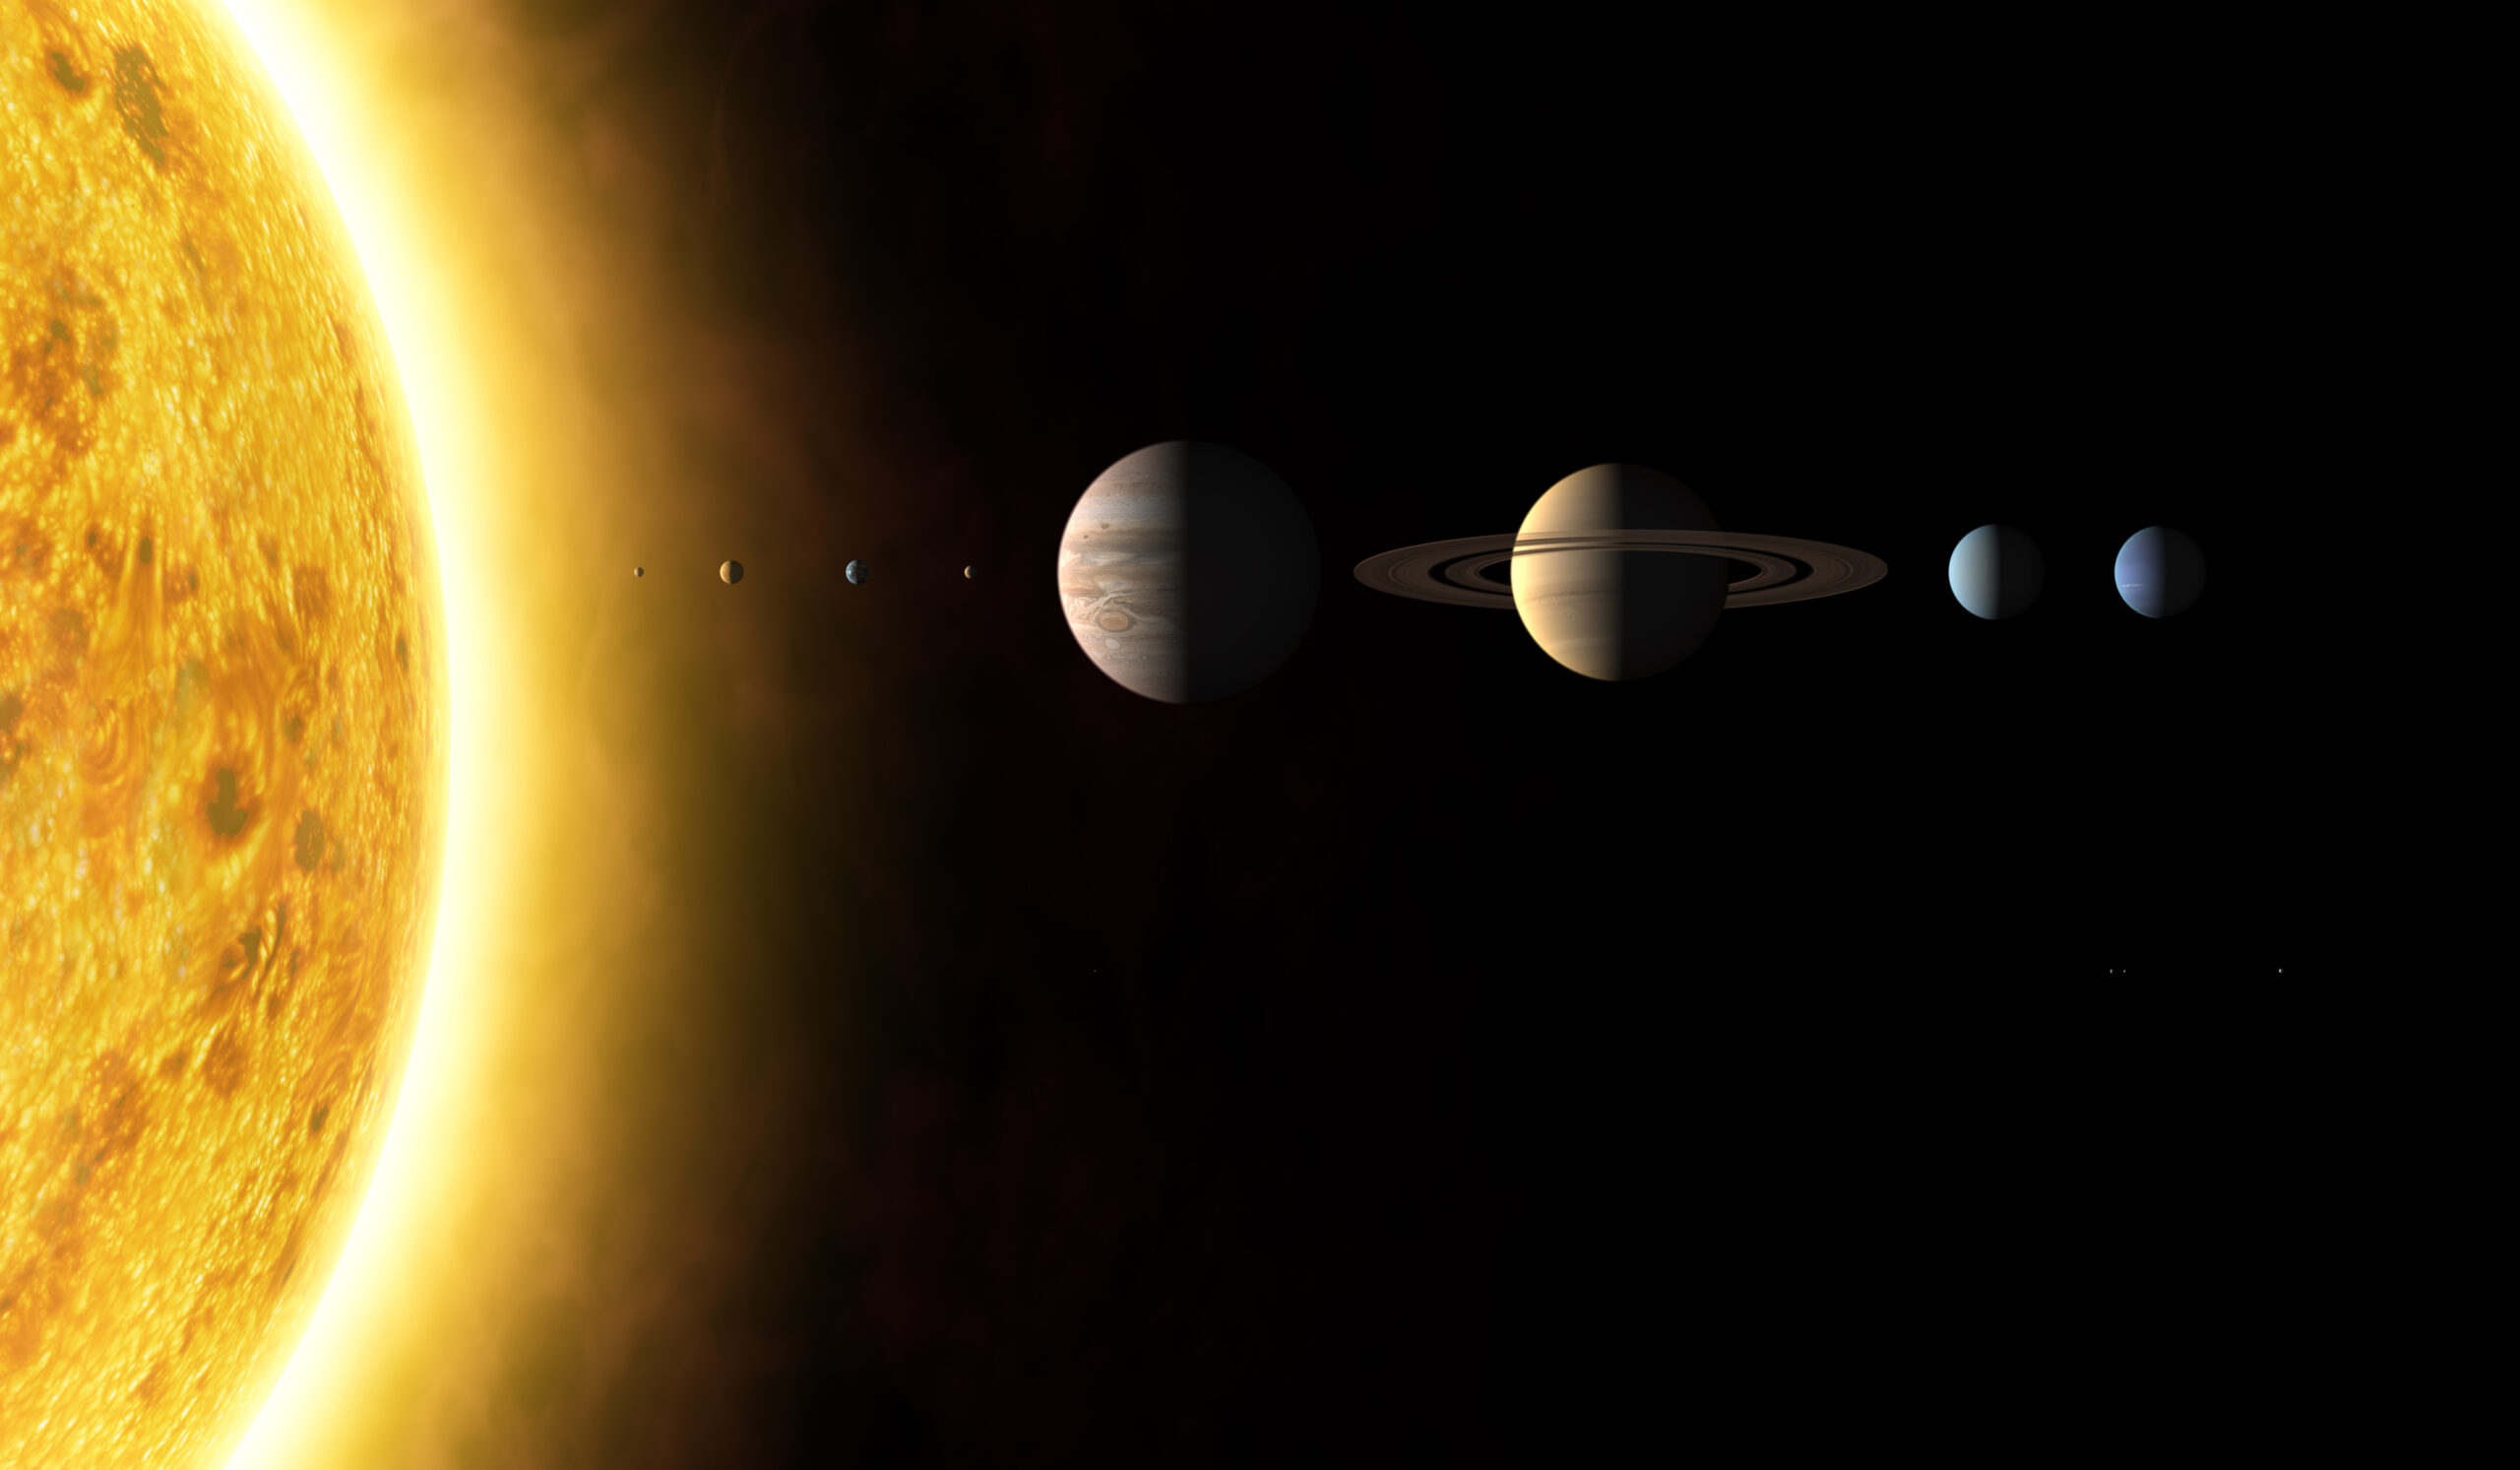 A row of planets and the sun.